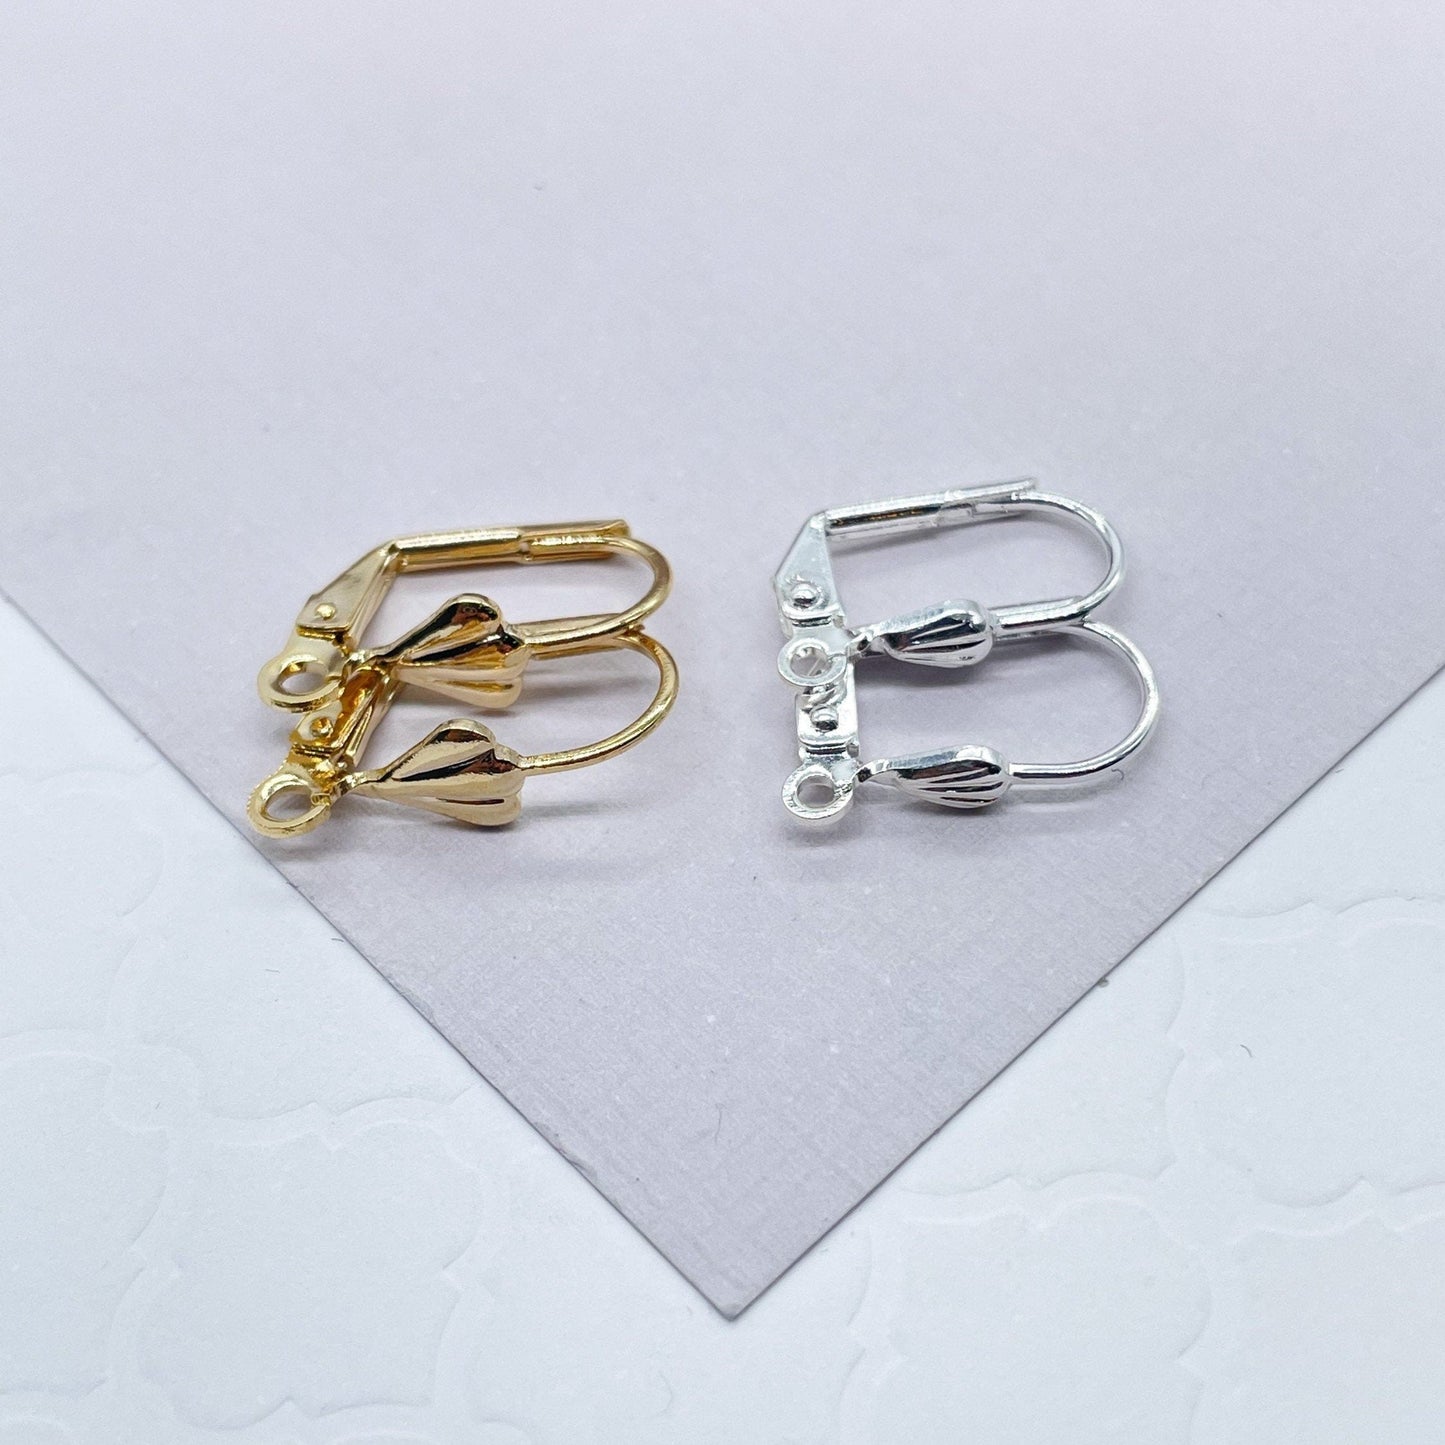 18k Gold Filled Lever Back Hook Clasps Findings Jewelry Making Designing Styling DIY